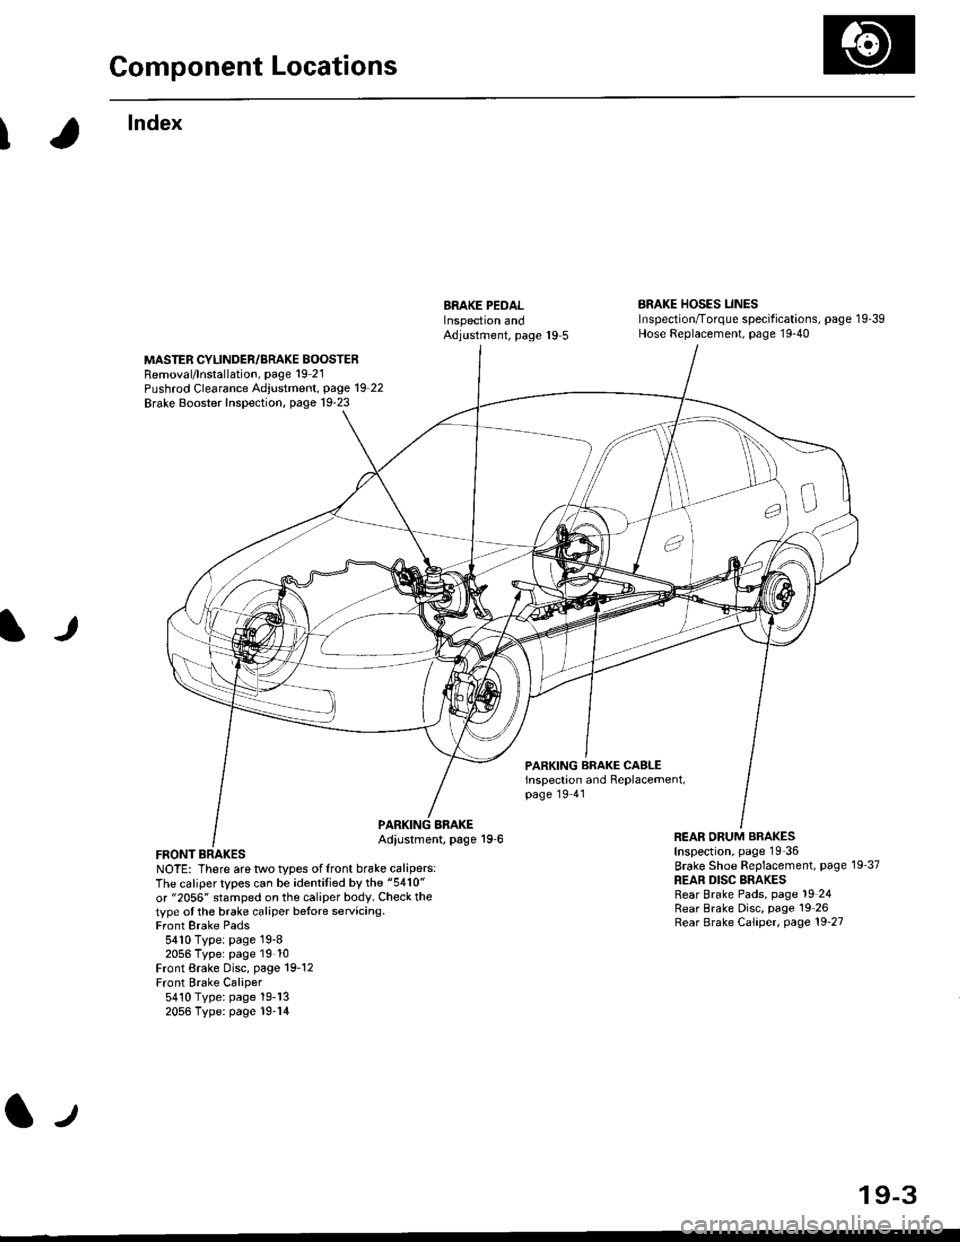 HONDA CIVIC 1996 6.G Workshop Manual Component Locations
I
lndex
ERAKE PEDALInspectron andAdjustment, page 19 5
BRAKE HOSES LINESInspection/Torque specif ications, page 1 9-39Hose Replacement, page 19-40
MASTER CYLINDER/BRAKE BOOSTERRemo